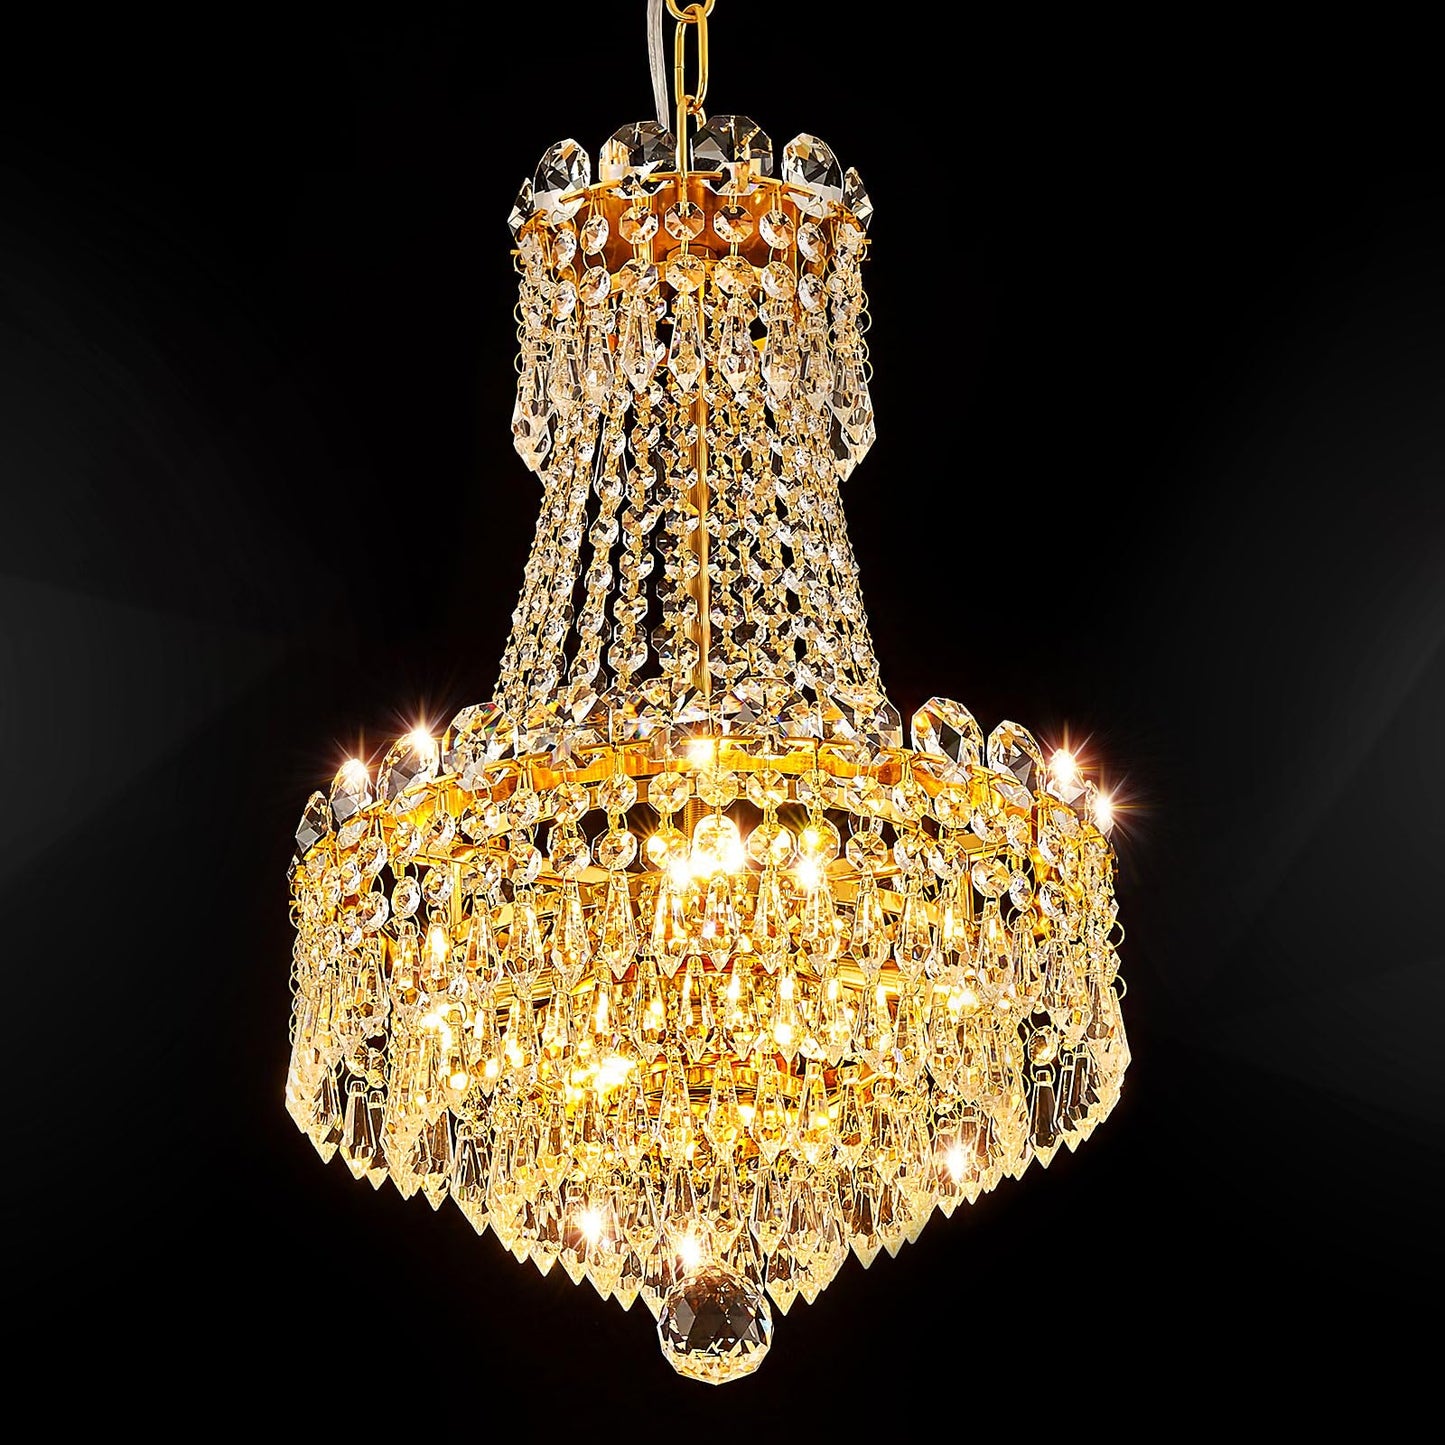 CEENWE 5 Light Gold Fish Crystal Chandelier,French Empire Style Chandeliers,Classic K9 Crystals Rain Drop Fixture for Living Room Foyer Entryway Hotel